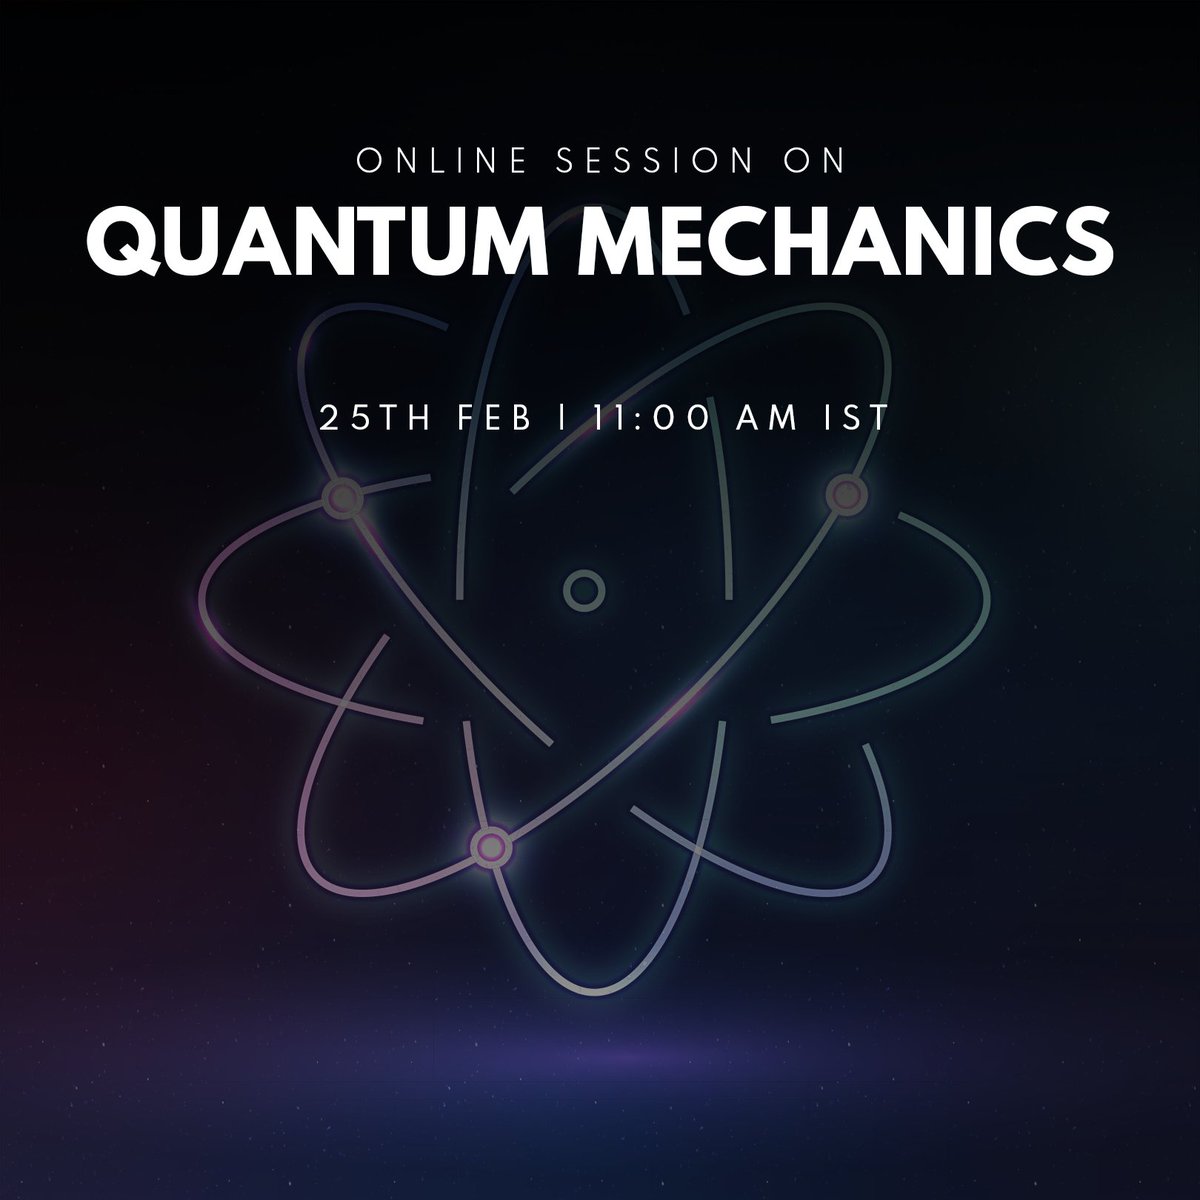 This Sunday, let's dive into the bizzare world of Quantum Mechanics and explore the fundamentals of the world full of probabilities. Let's DECODE Quantum Mechanics. Date: 25th February Time: 11:00 AM IST Platform: Google Meet Registration is FREE Link: bit.ly/QM-STAR